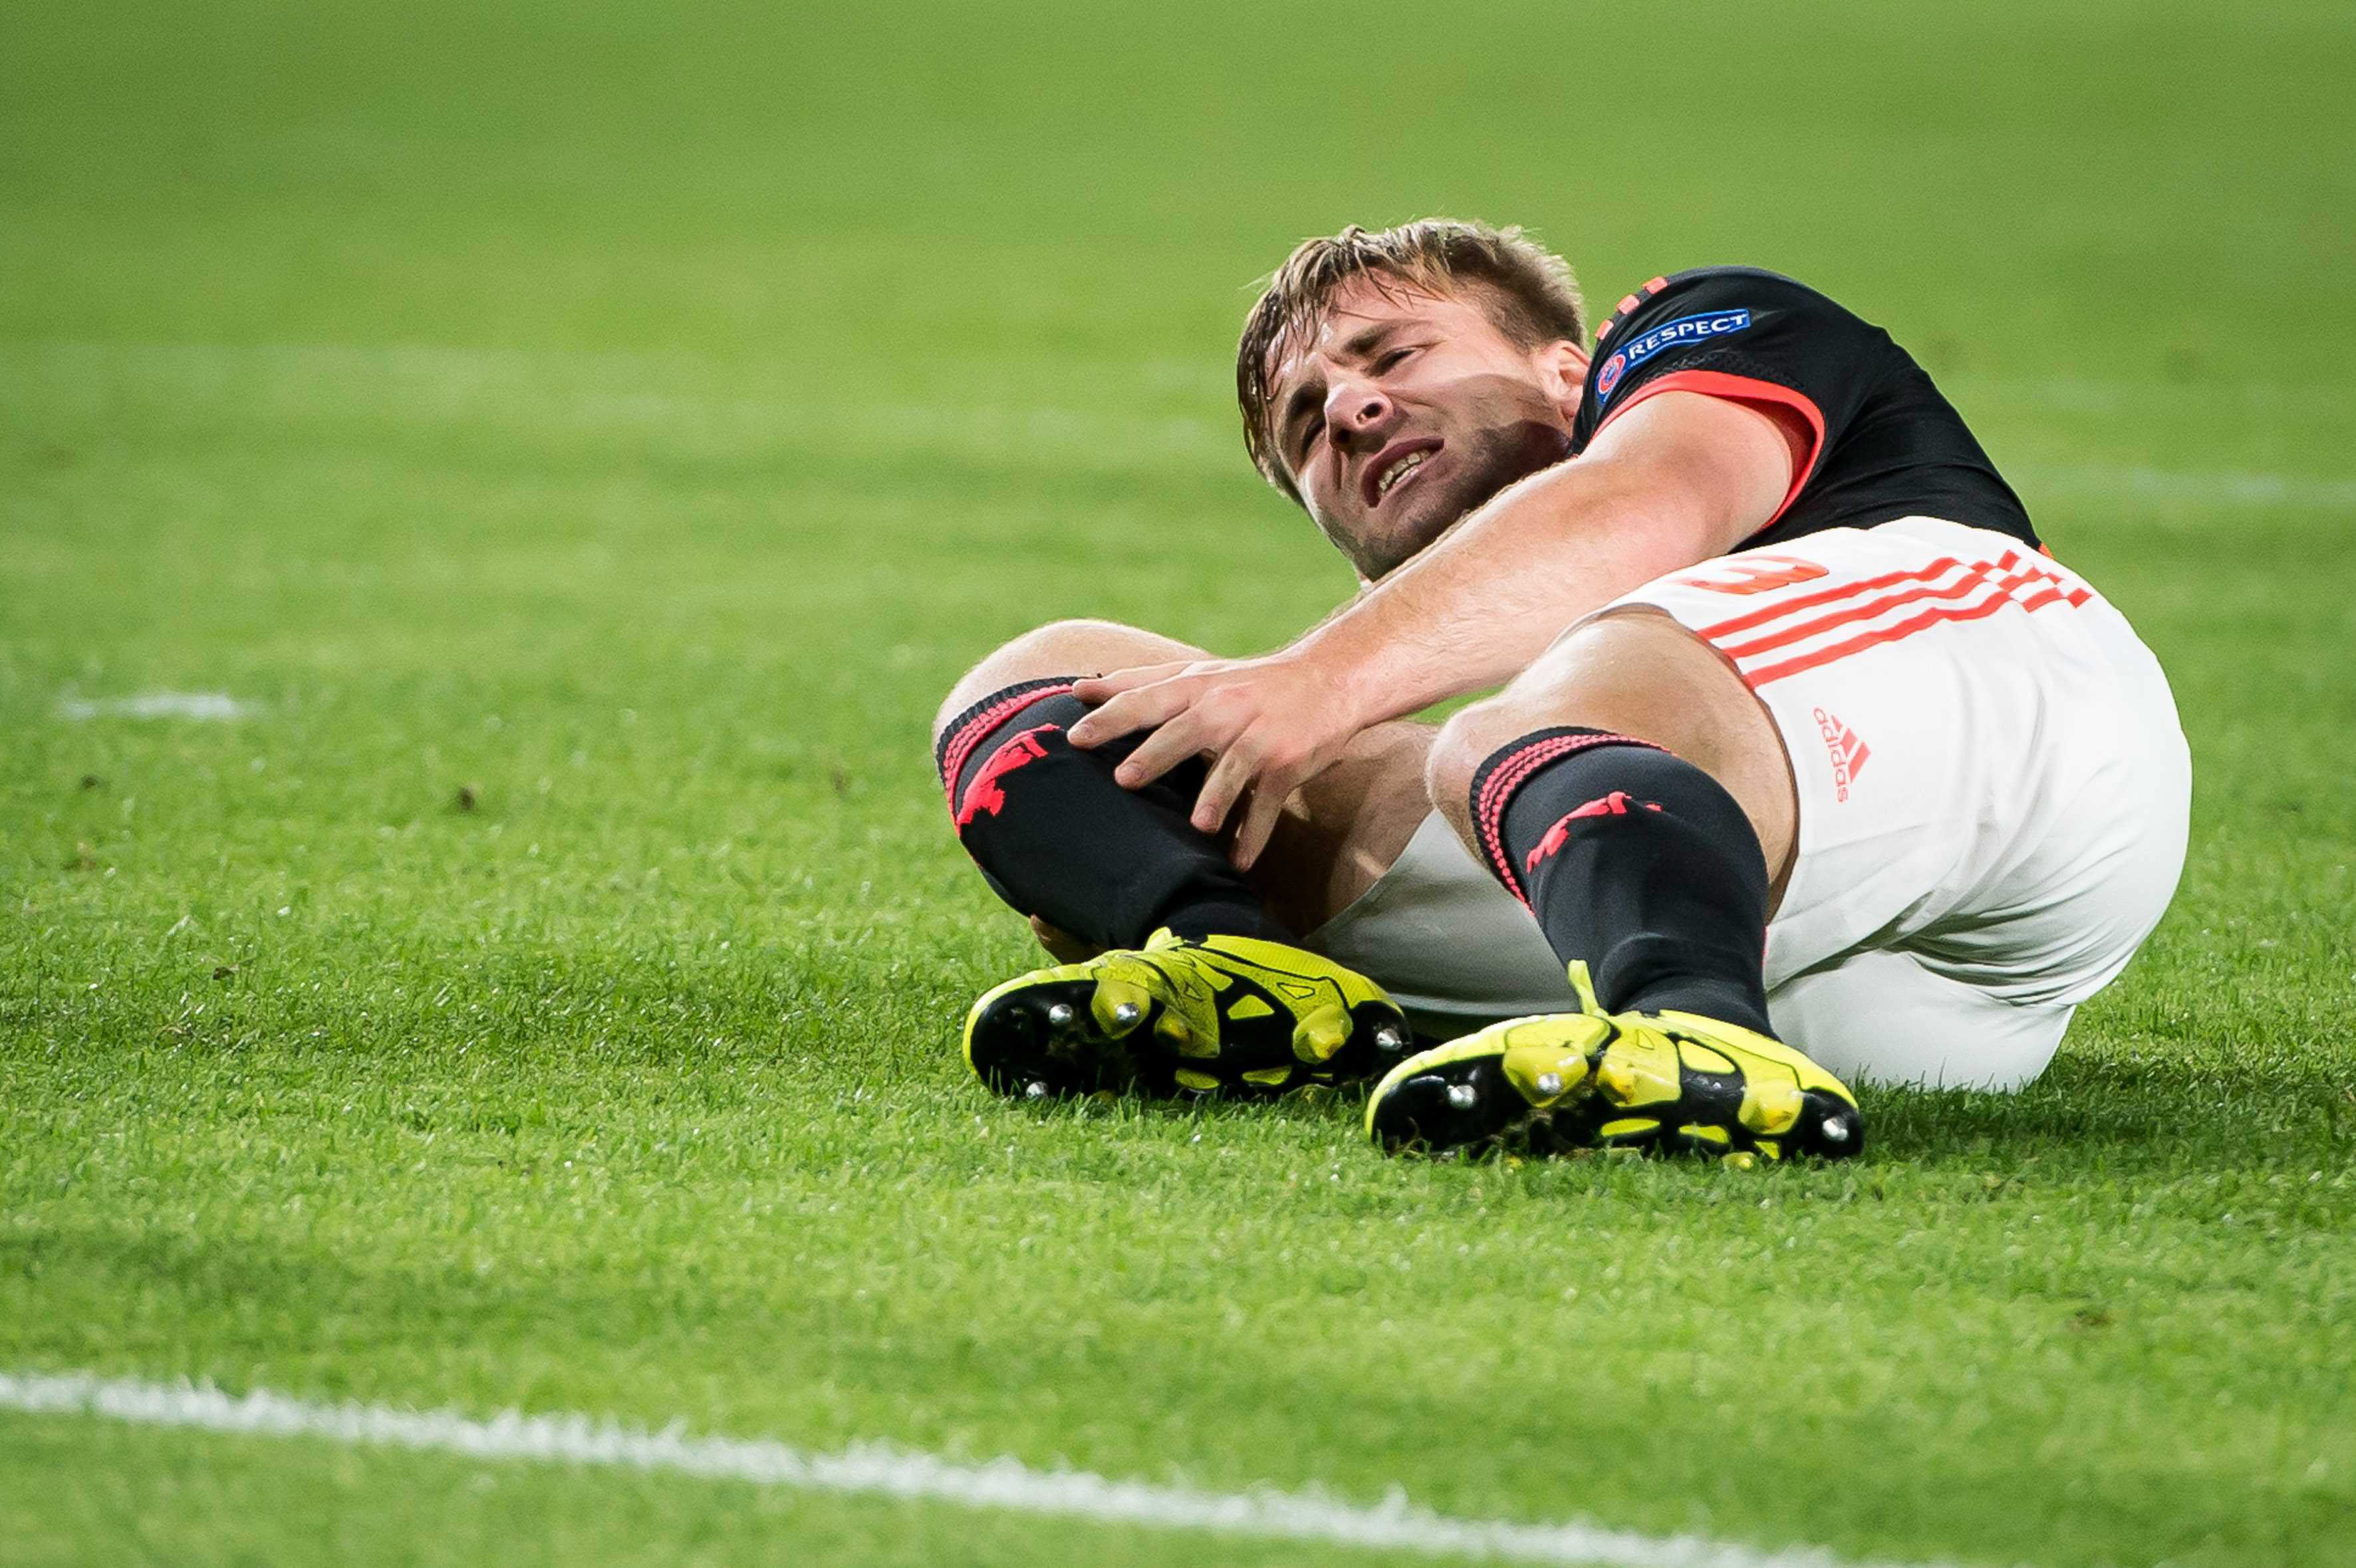 epa04932430 Manchester United's Luke Shaw reacts in pain and hold his right leg during the UEFA Champions League match between PSV Eindhoven and Manchester United in Eindhoven, the Netherlands, 15 September 2015.  EPA/RONALD BONESTROO